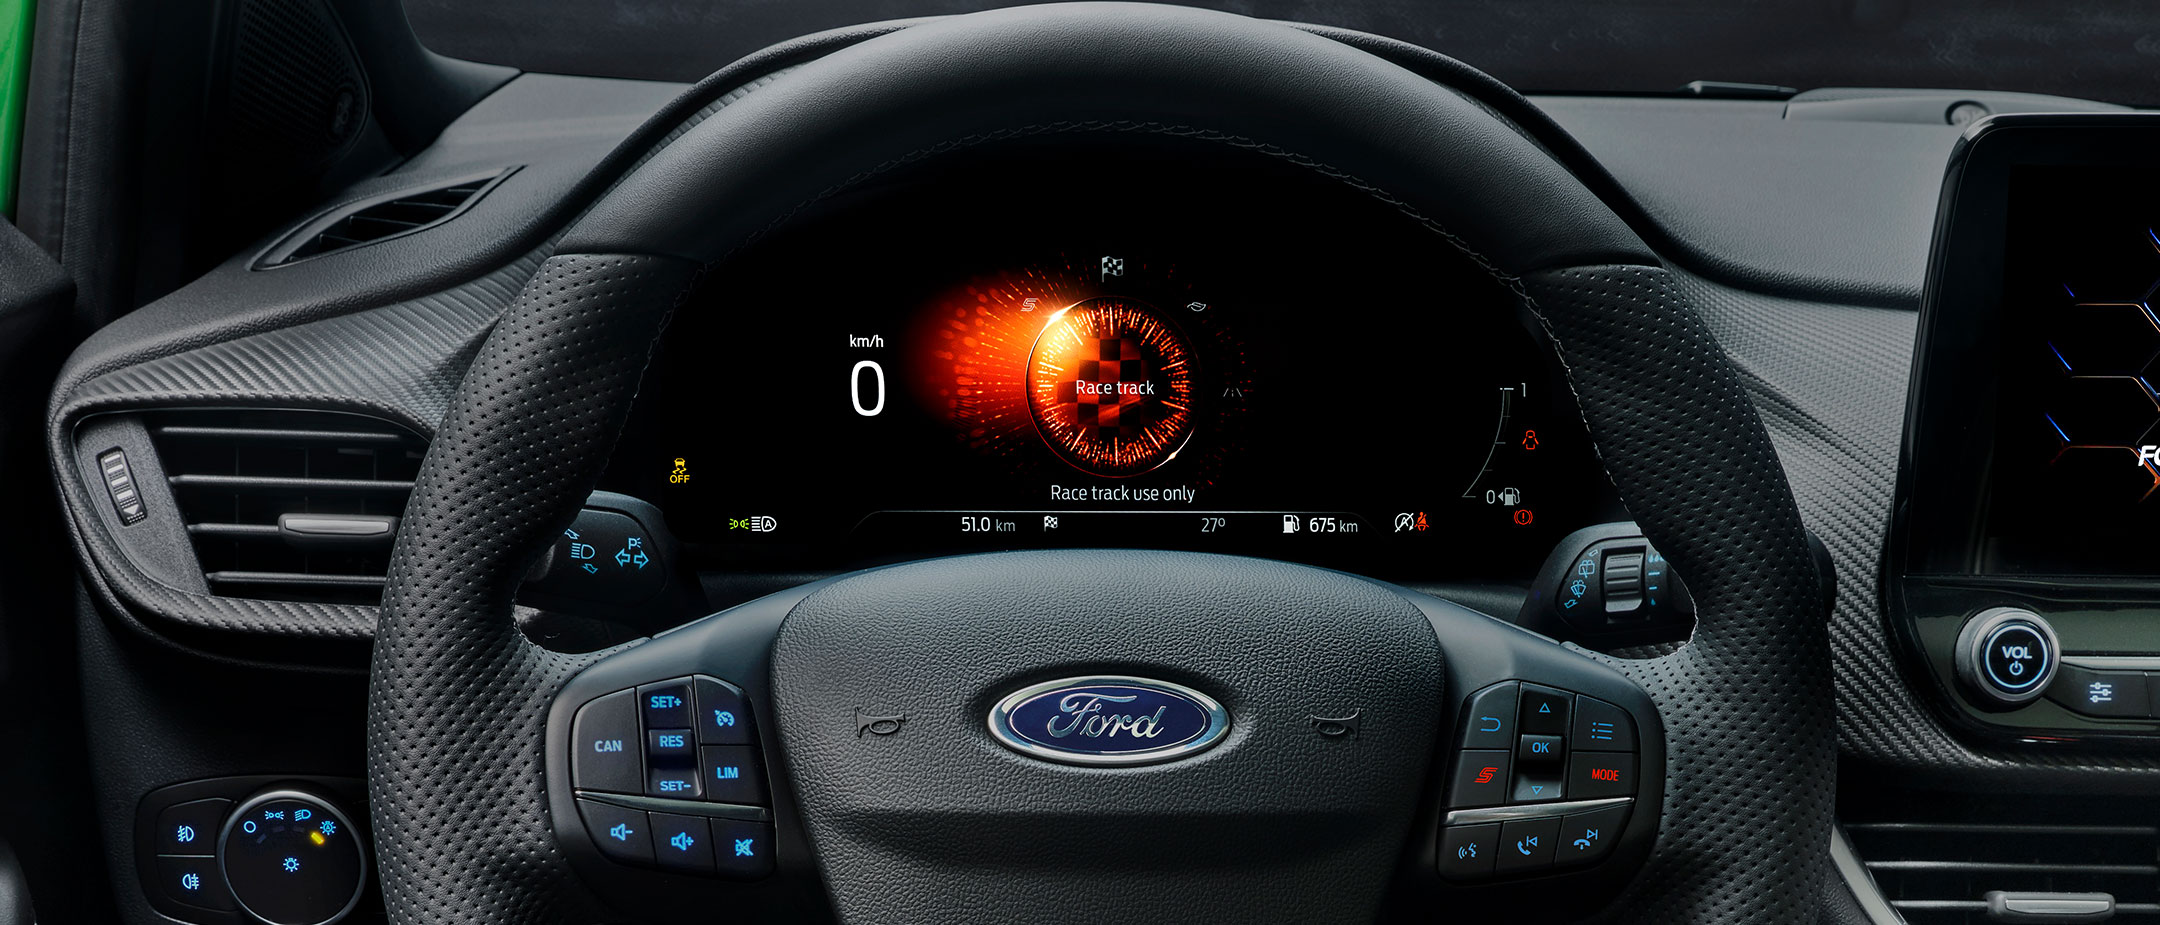 Ford Puma ST dashboard showing drive modes